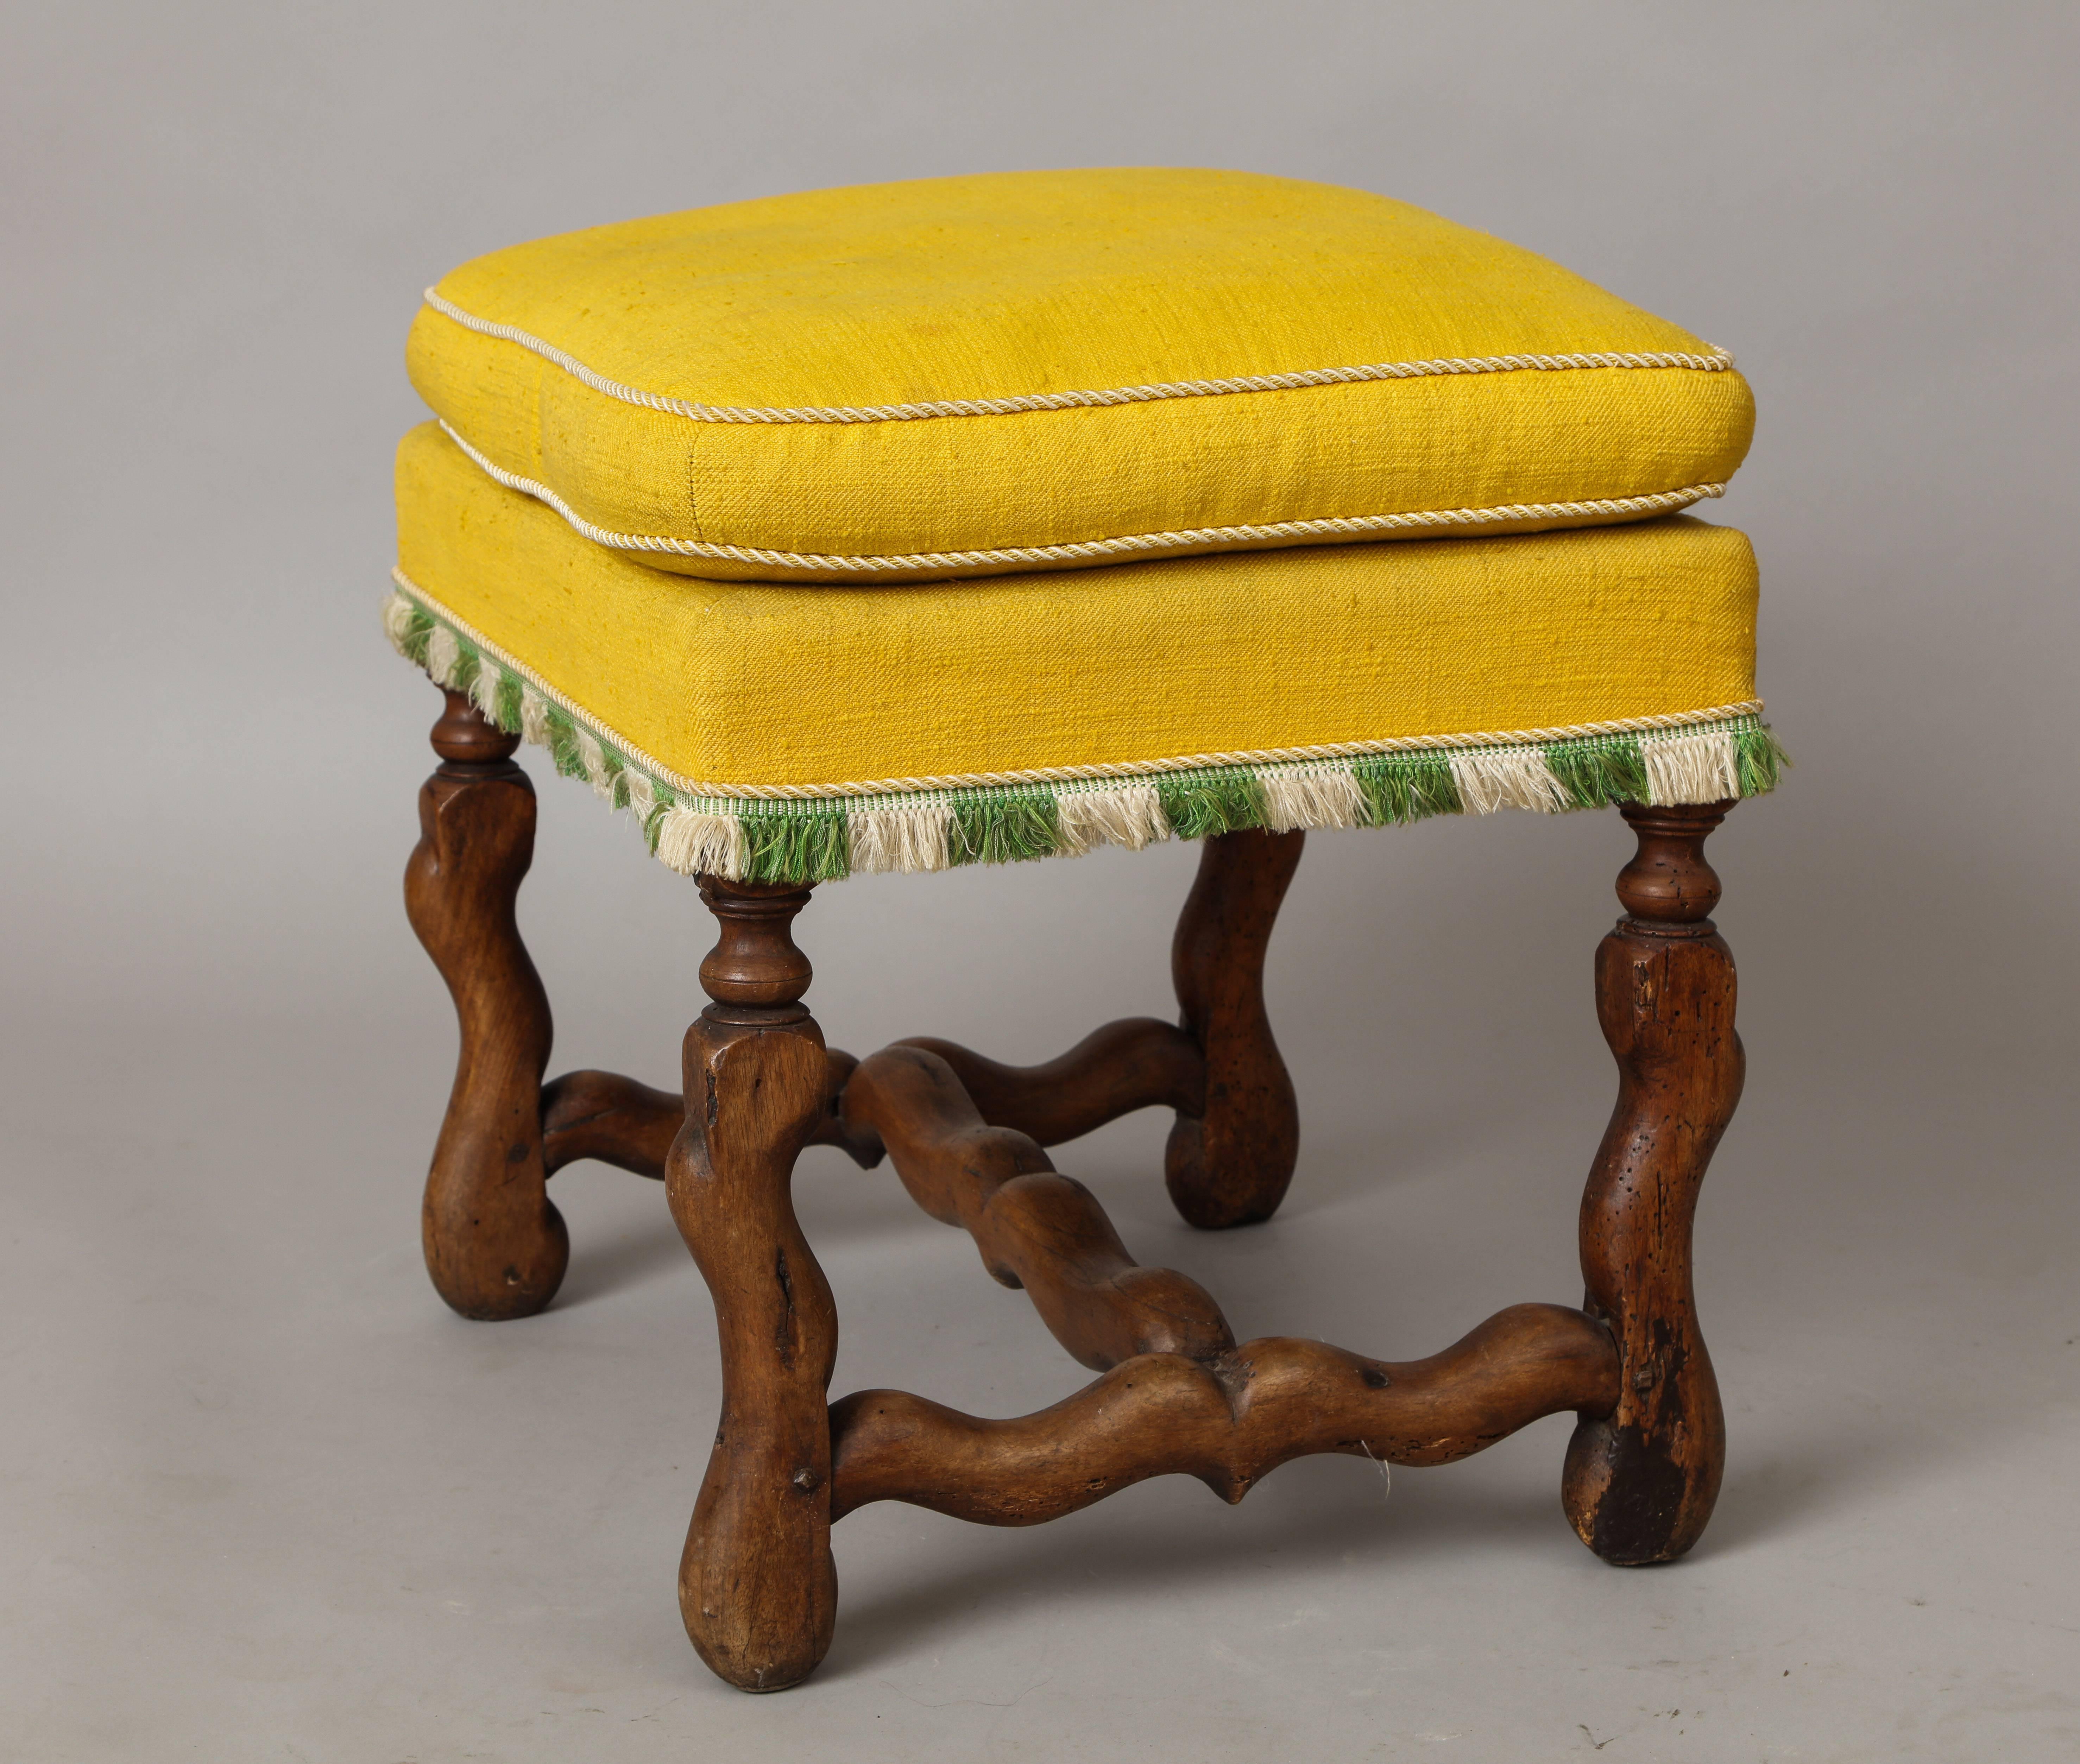 A French Louis XIII period walnut stool with ‘Os de mouton’ legs and stretcher, upholstered in whimsical yellow cotton with green and cream tassels.
France, 17th century.
     
  